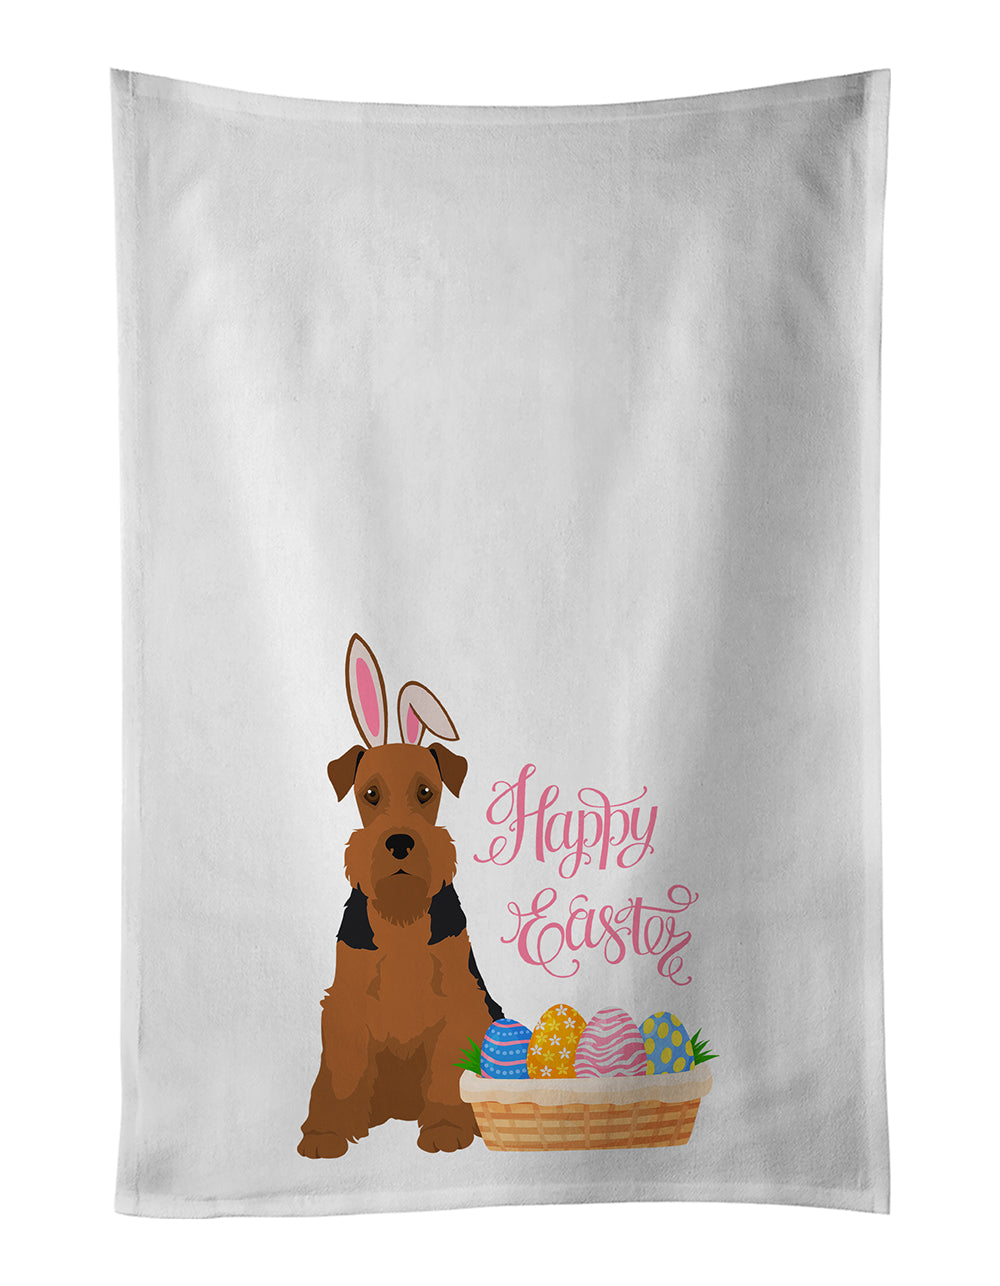 Buy this Black and Tan Airedale Terrier Easter White Kitchen Towel Set of 2 Dish Towels